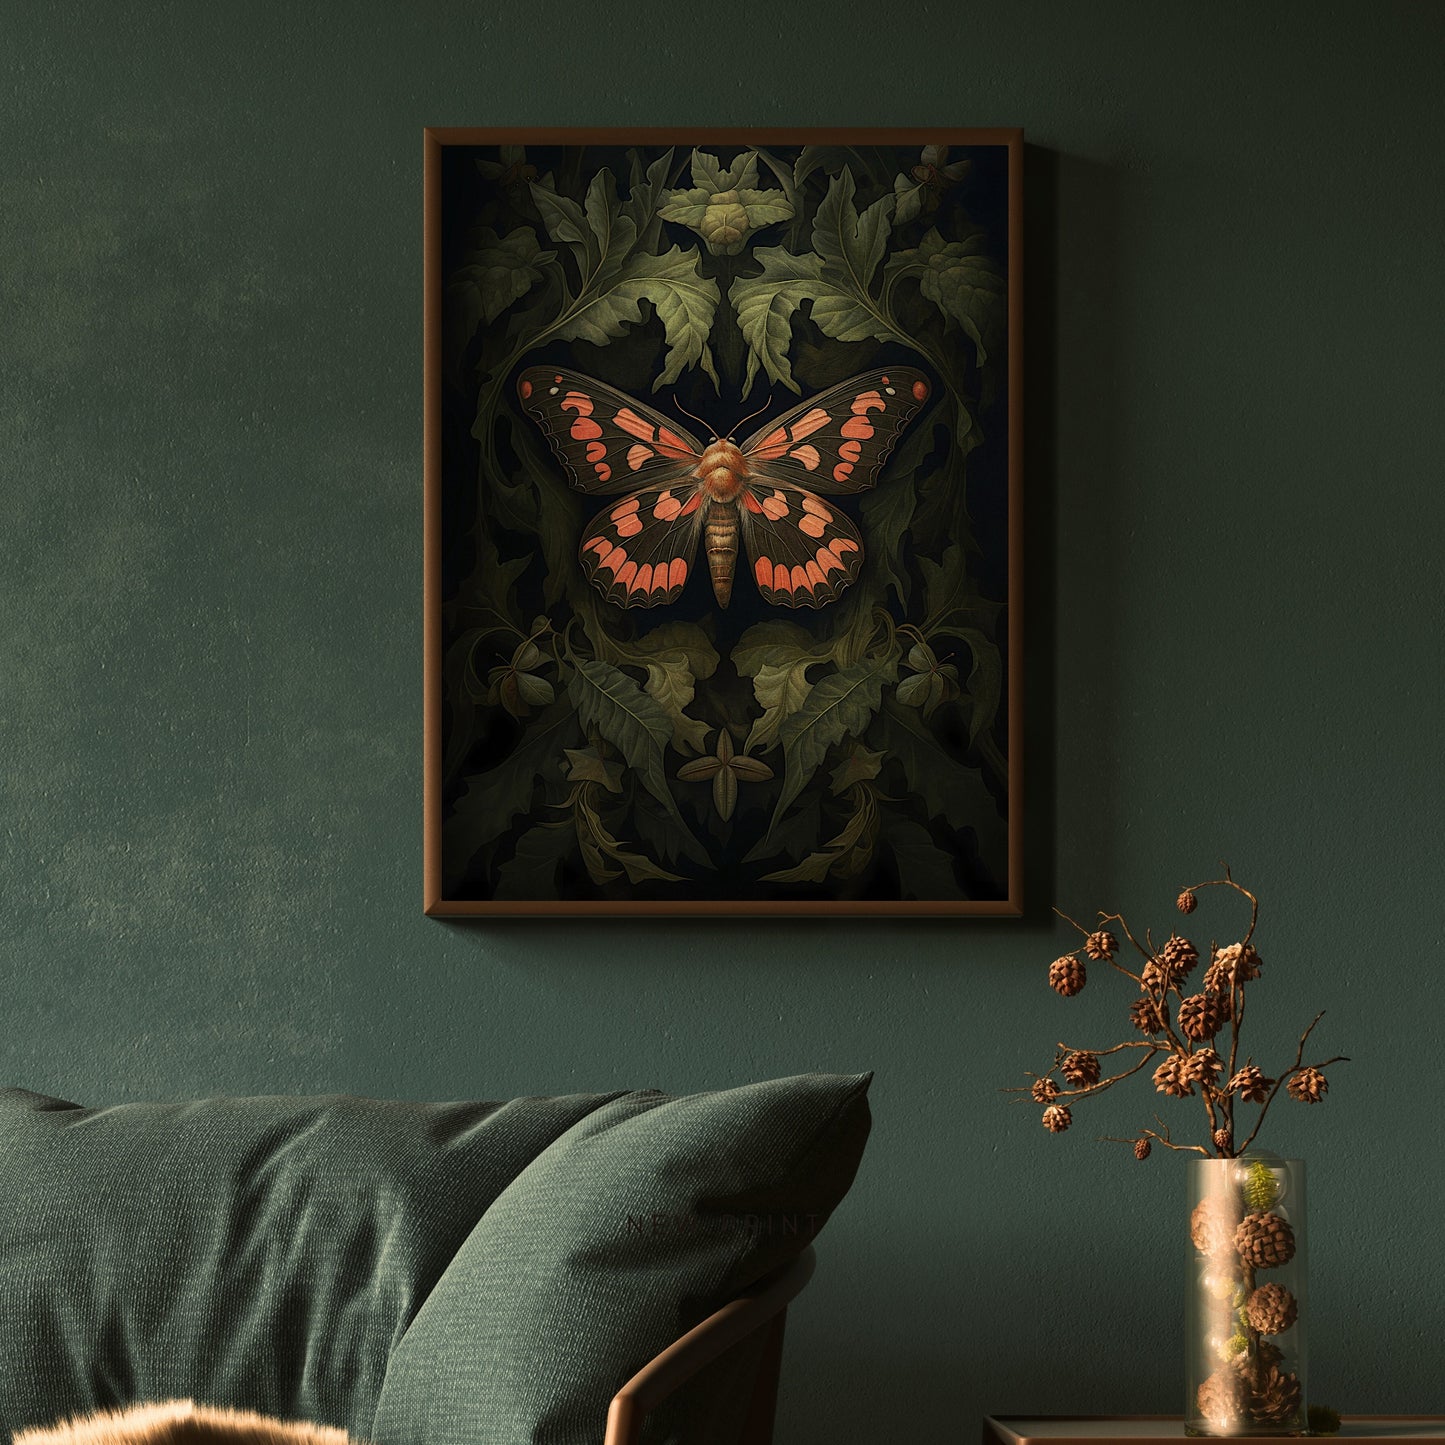 Dark Orange Moth Gothic Wall Art Paper Poster Prints Witchy Gothic Botanical Decor Dark Academia Goblincore Home Decor Moody Painting  Antique Library Decor